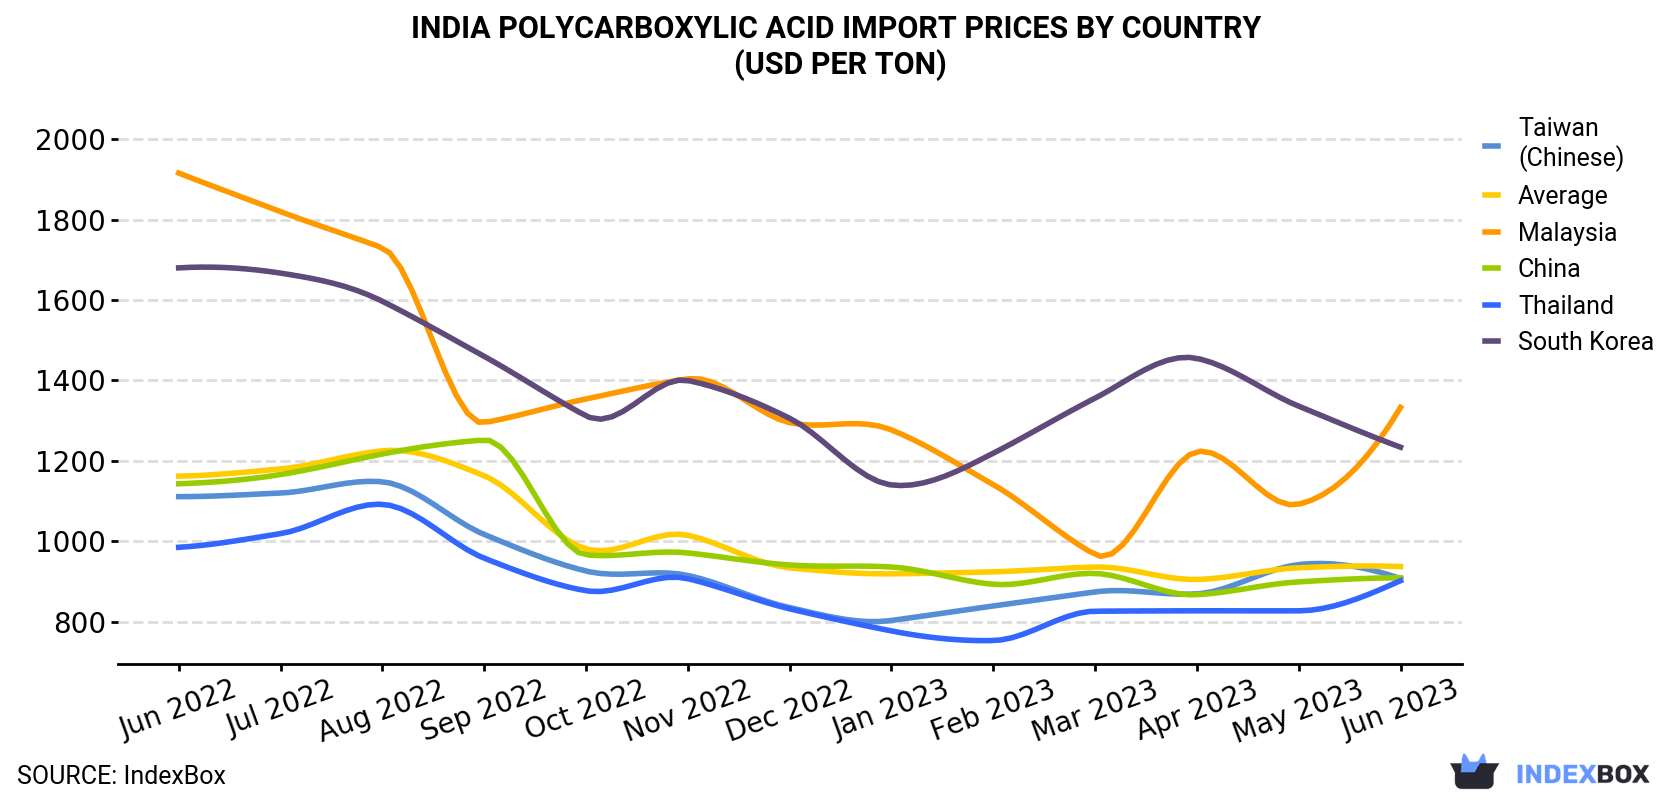 India Polycarboxylic Acid Import Prices By Country (USD Per Ton)